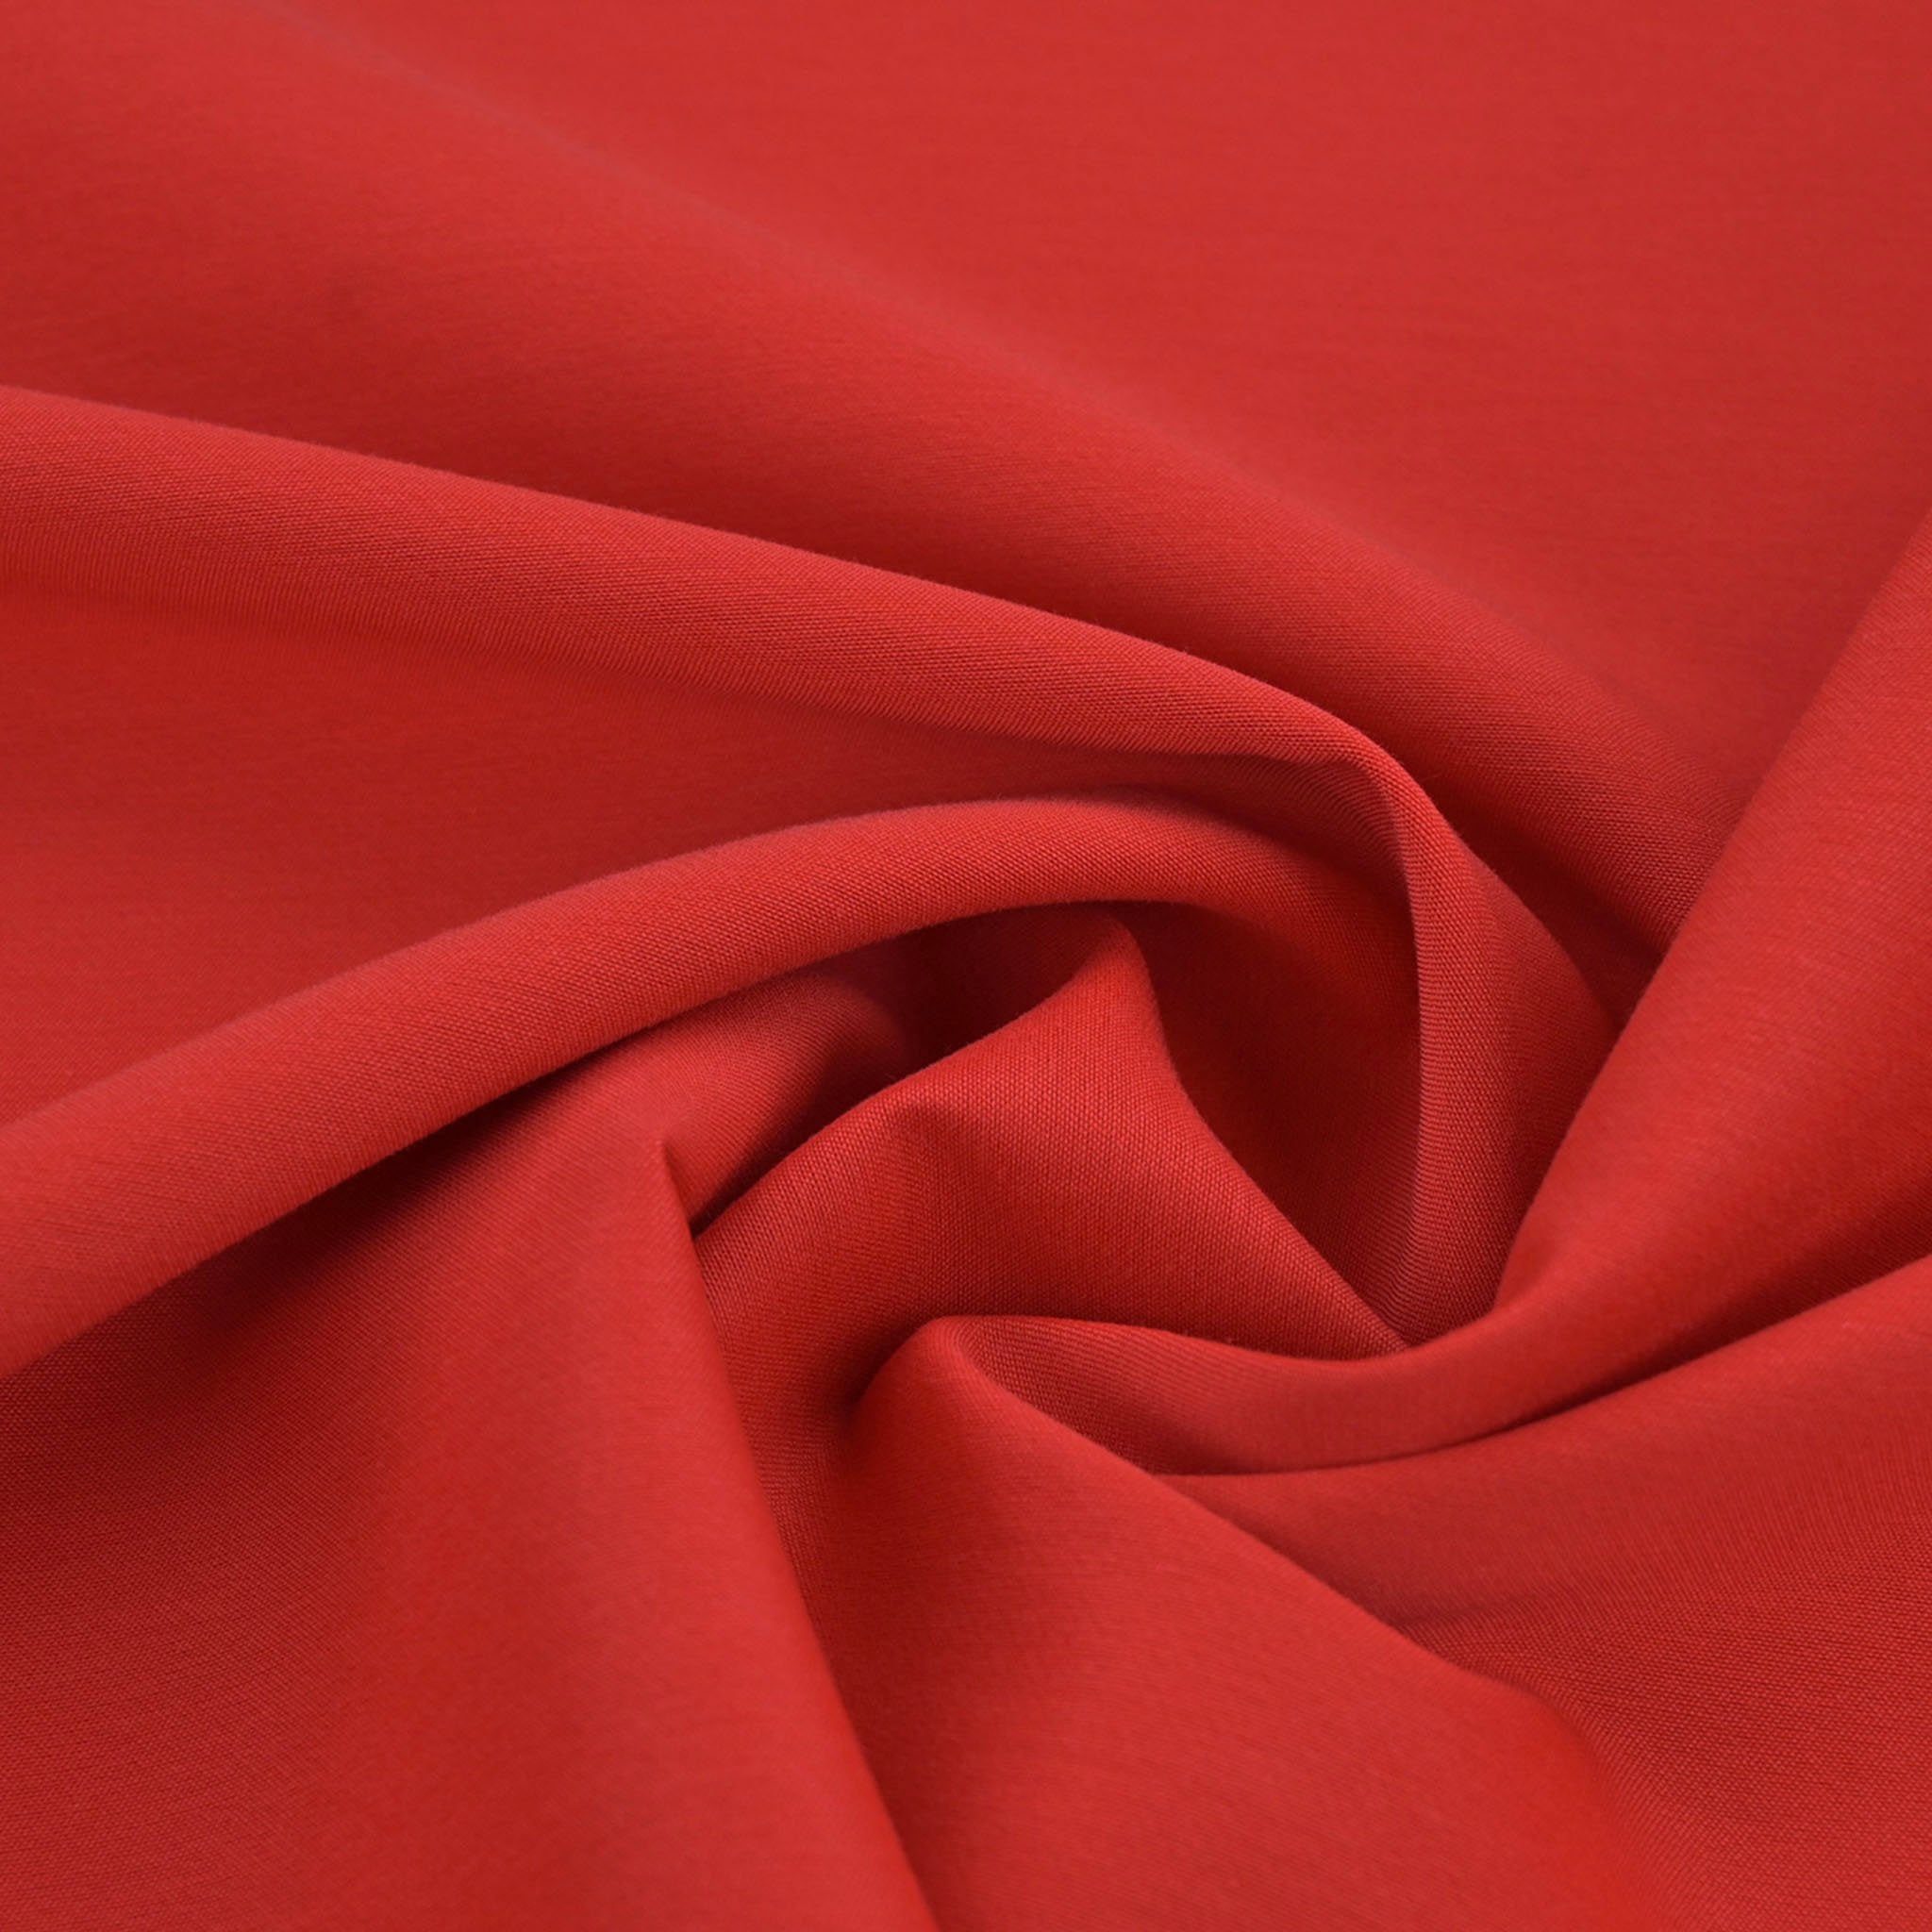 Red Double Weave Fabric 96860